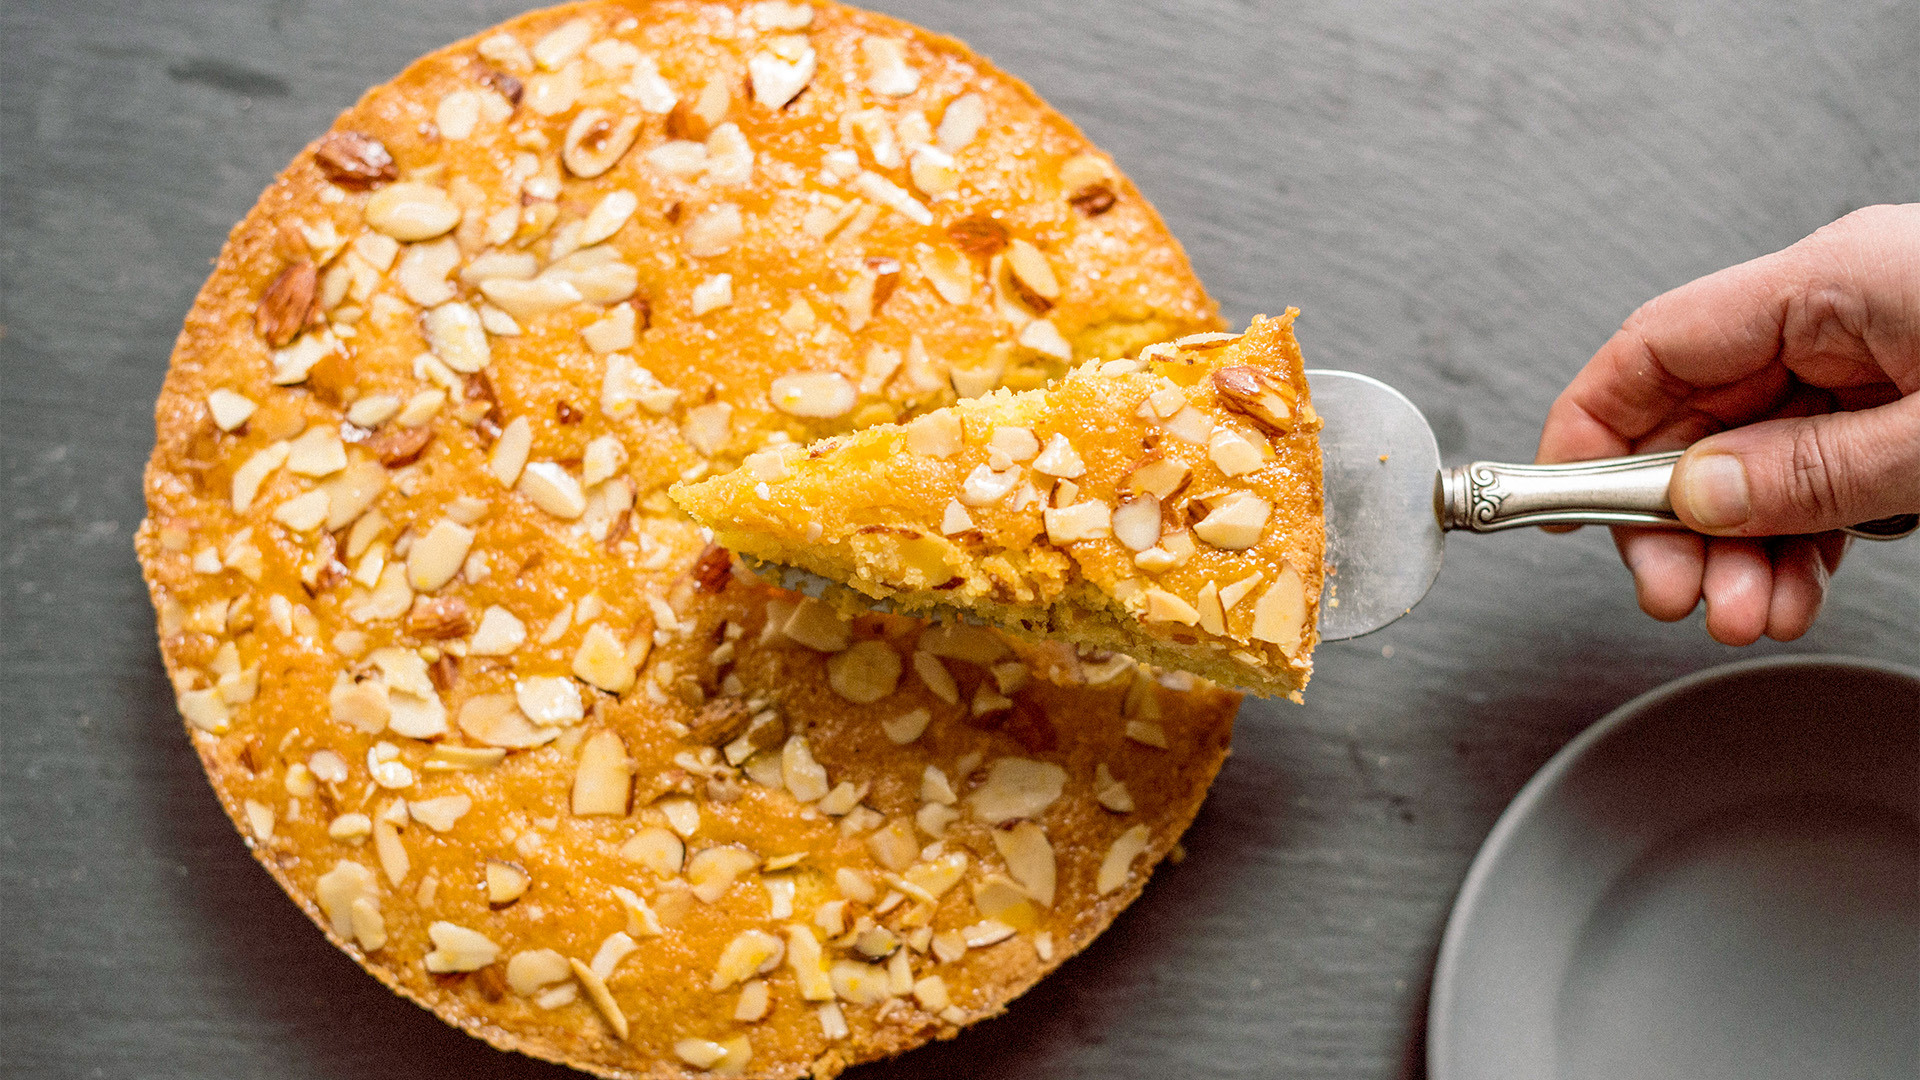 Best Tangerine-Almond Cake with Bay-Infused Syrup Recipe